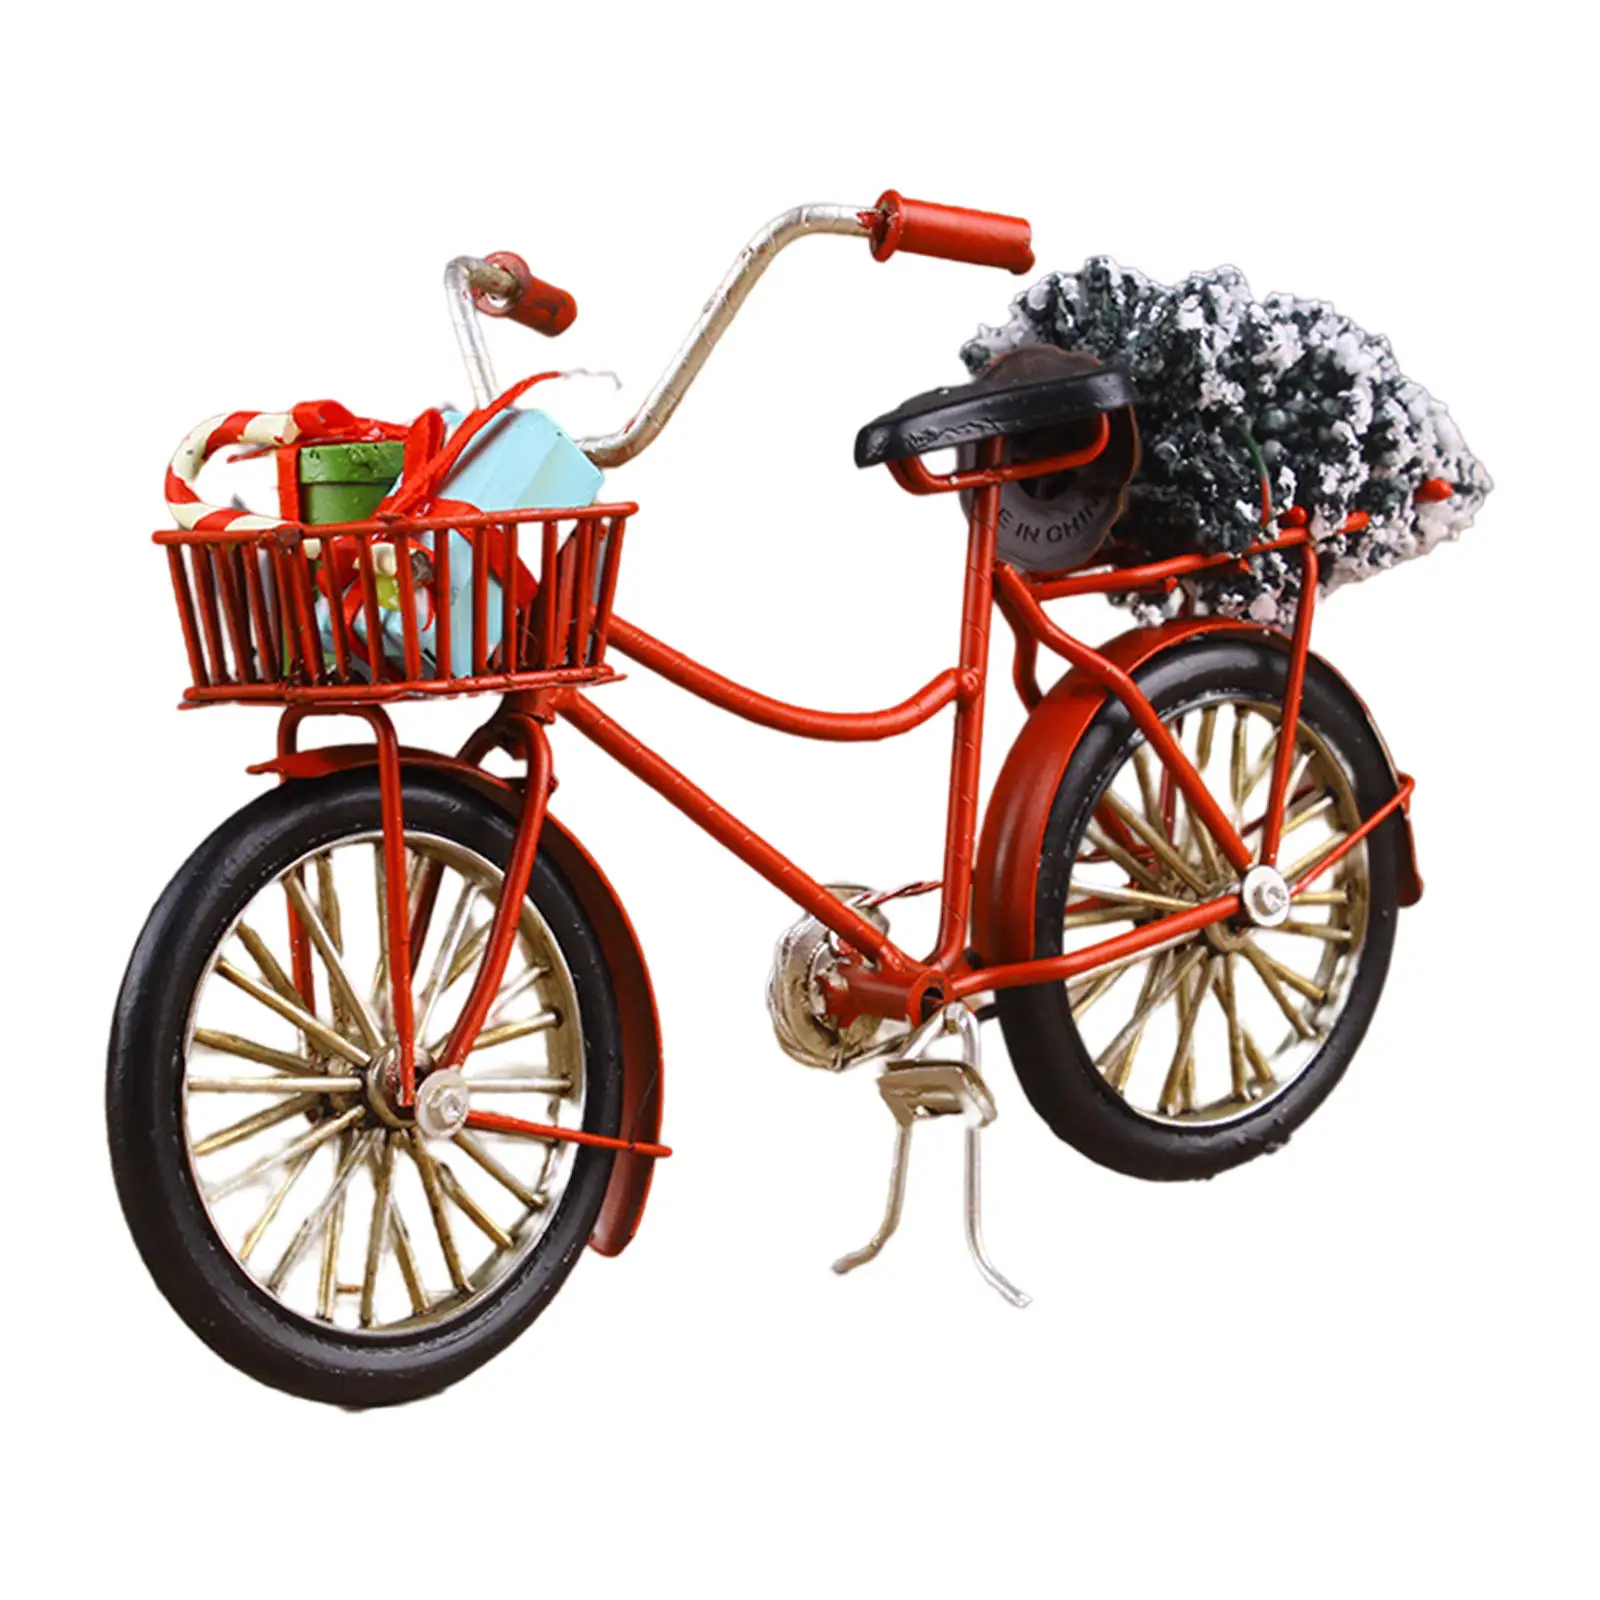 Miniature Pink Alloy Diecast Models Bicycle w/Basket & Seat Crafts Toy 1/10 